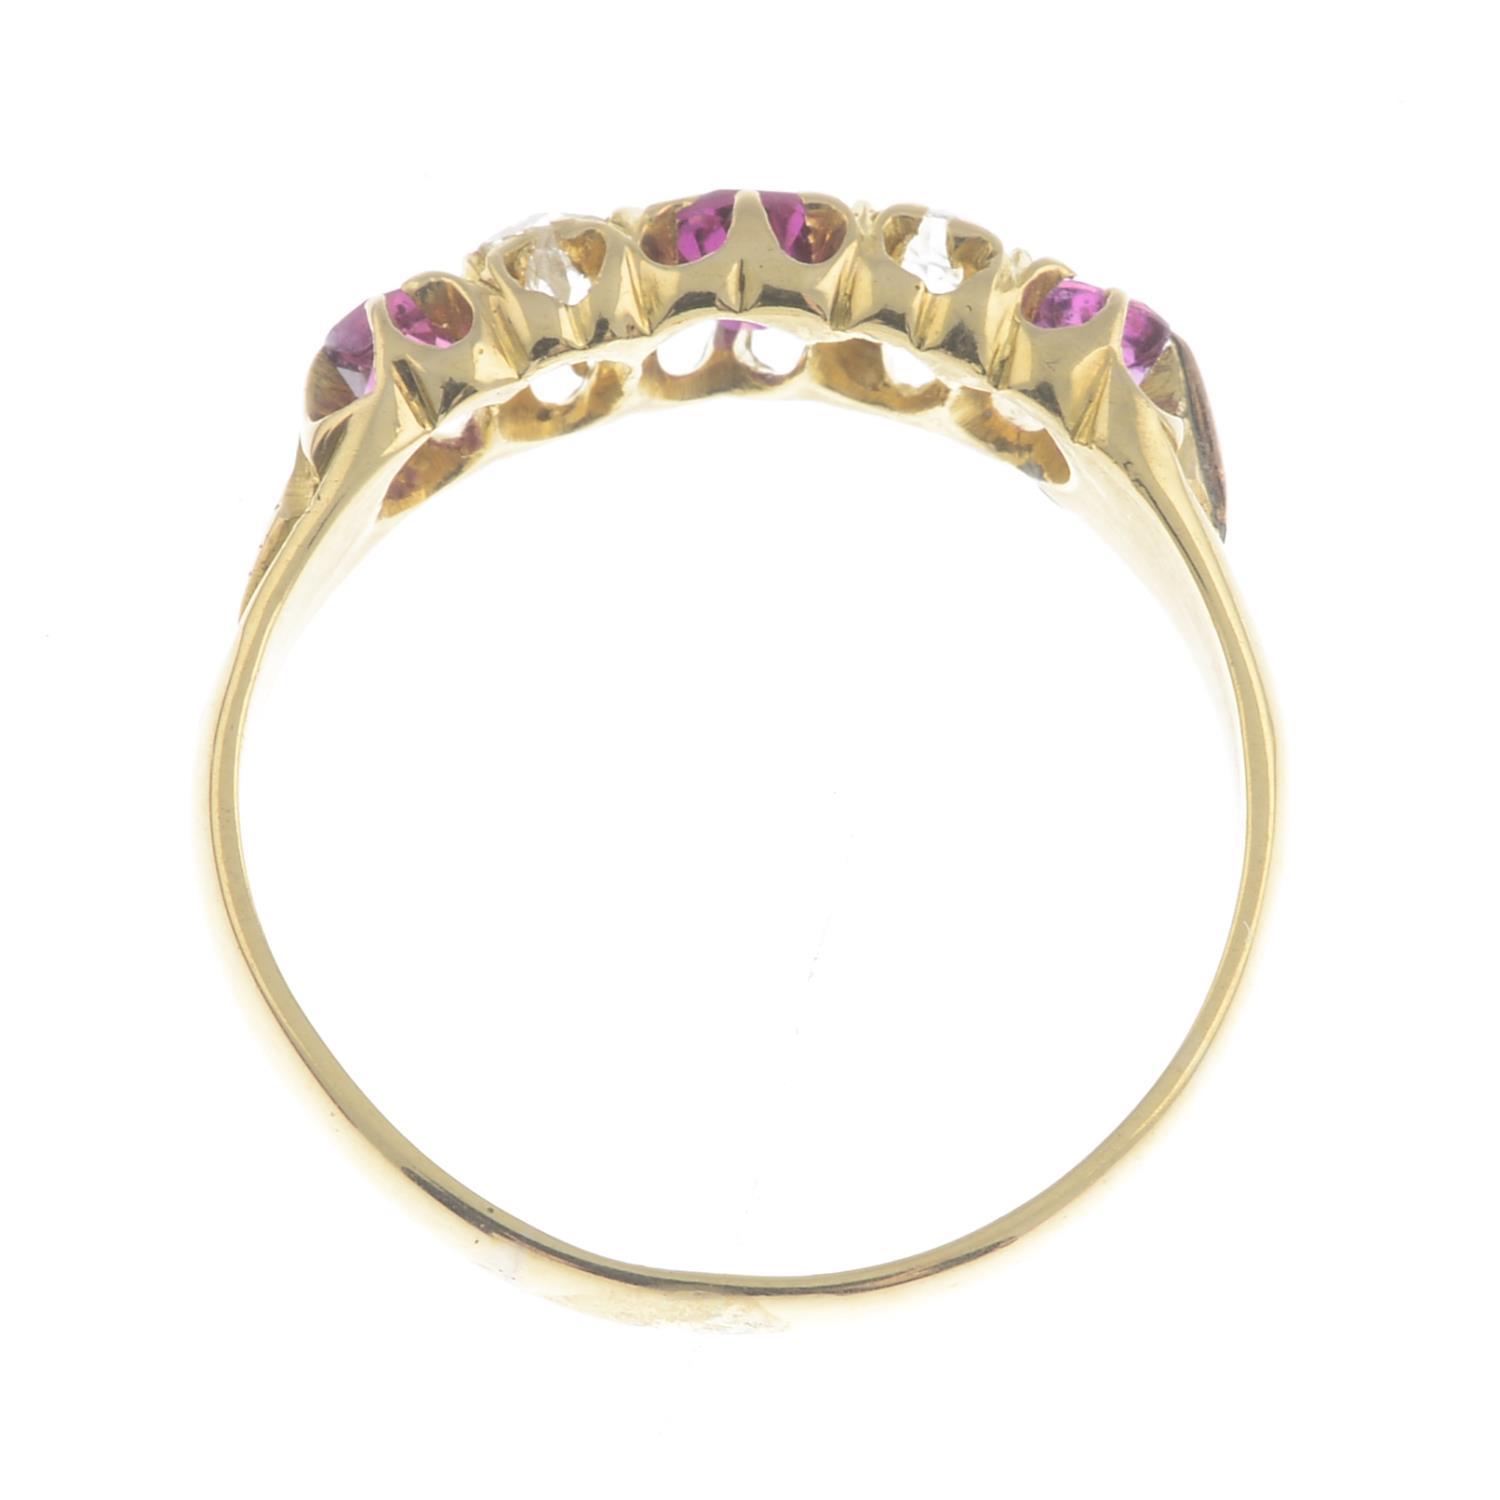 An early 20th century 18ct gold ruby and diamond five-stone ring. - Image 3 of 3